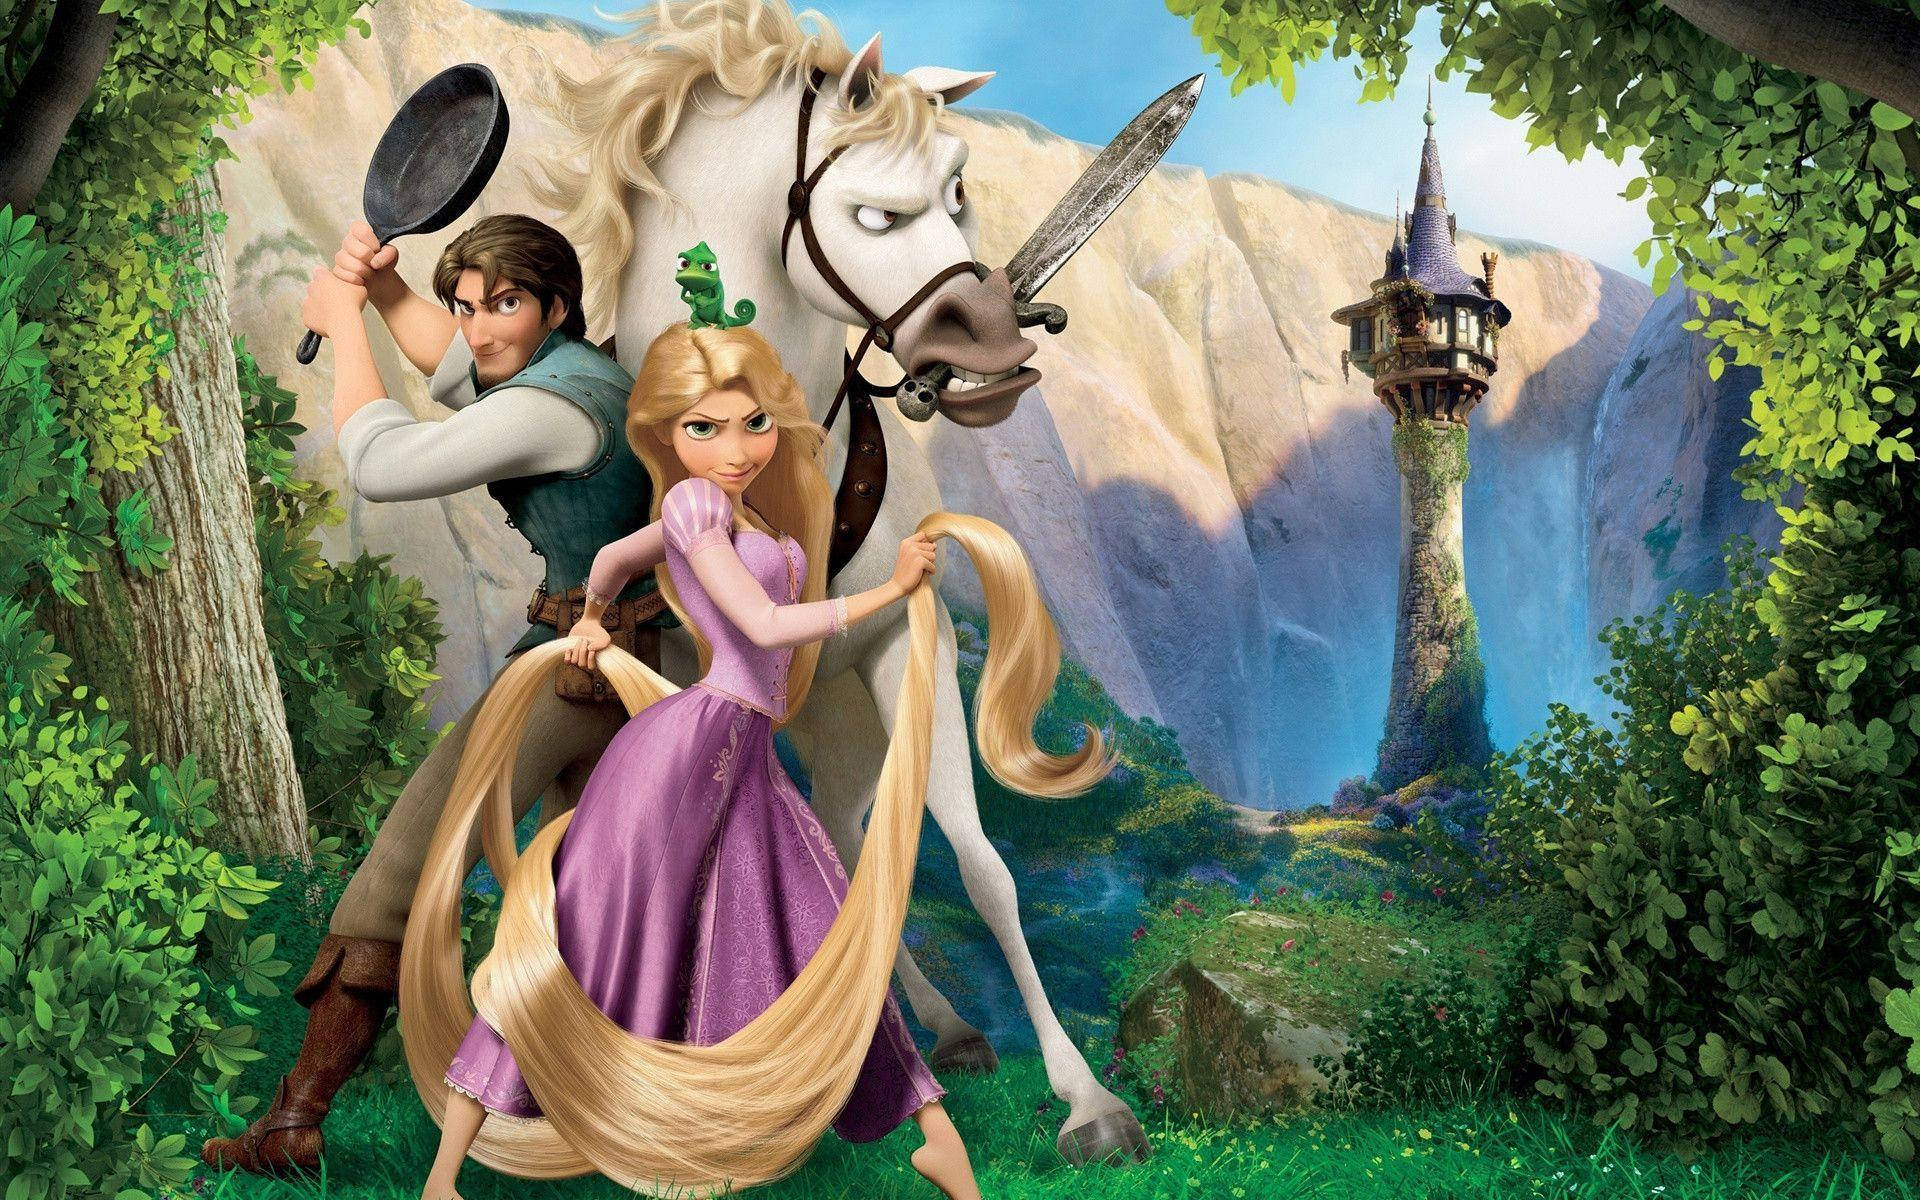 Rapunzel, a courageous young woman, uses her magical hair to take control of her fate. Wallpaper